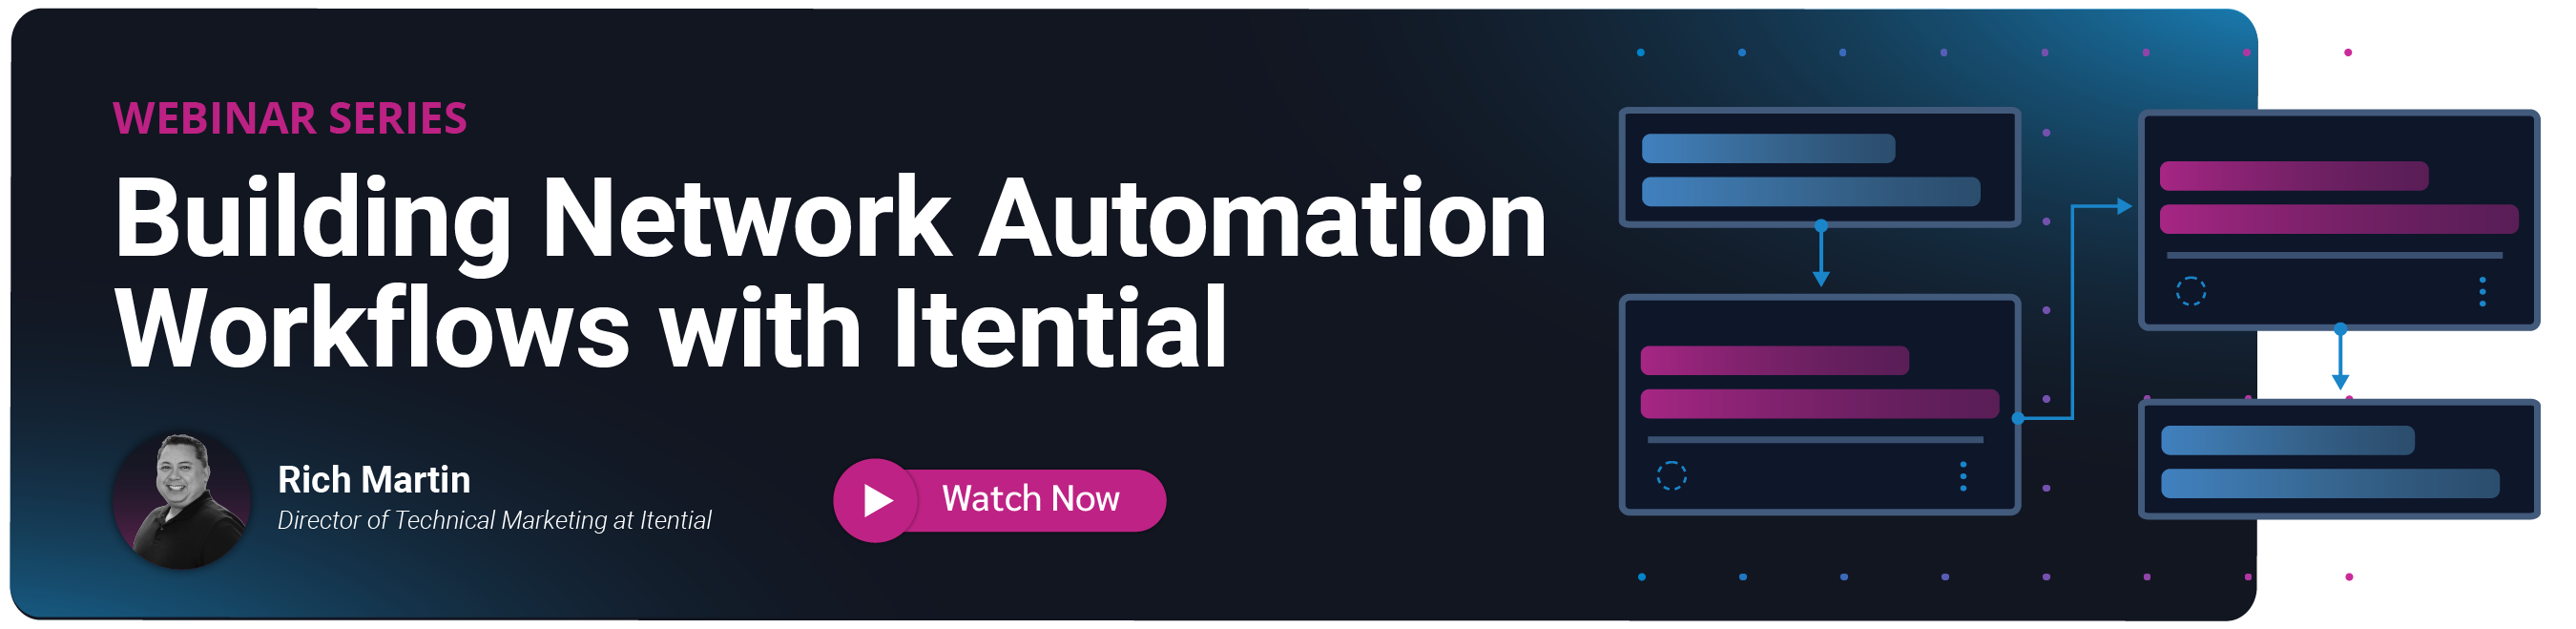 DEMO SERIES Building Network Automation Workflows with Itential